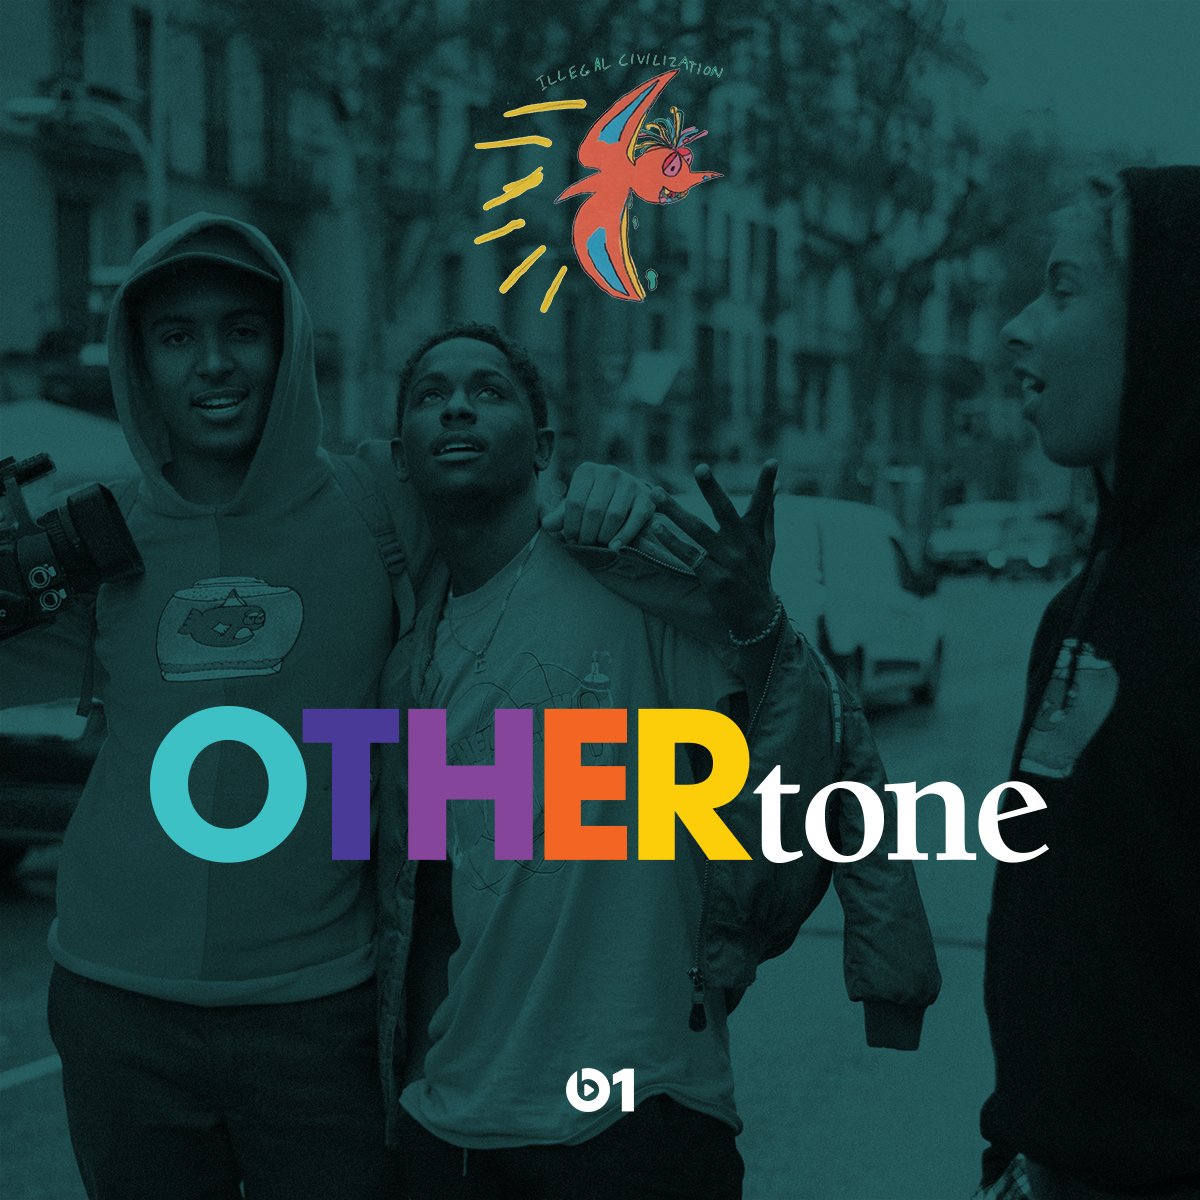 RT @i_am_OTHER: #OTHERtone Back tomorrow w/ @IllegalCiv at 12p PT/3p ET @Beats1 @applemusic https://t.co/lSc2UeYmmN